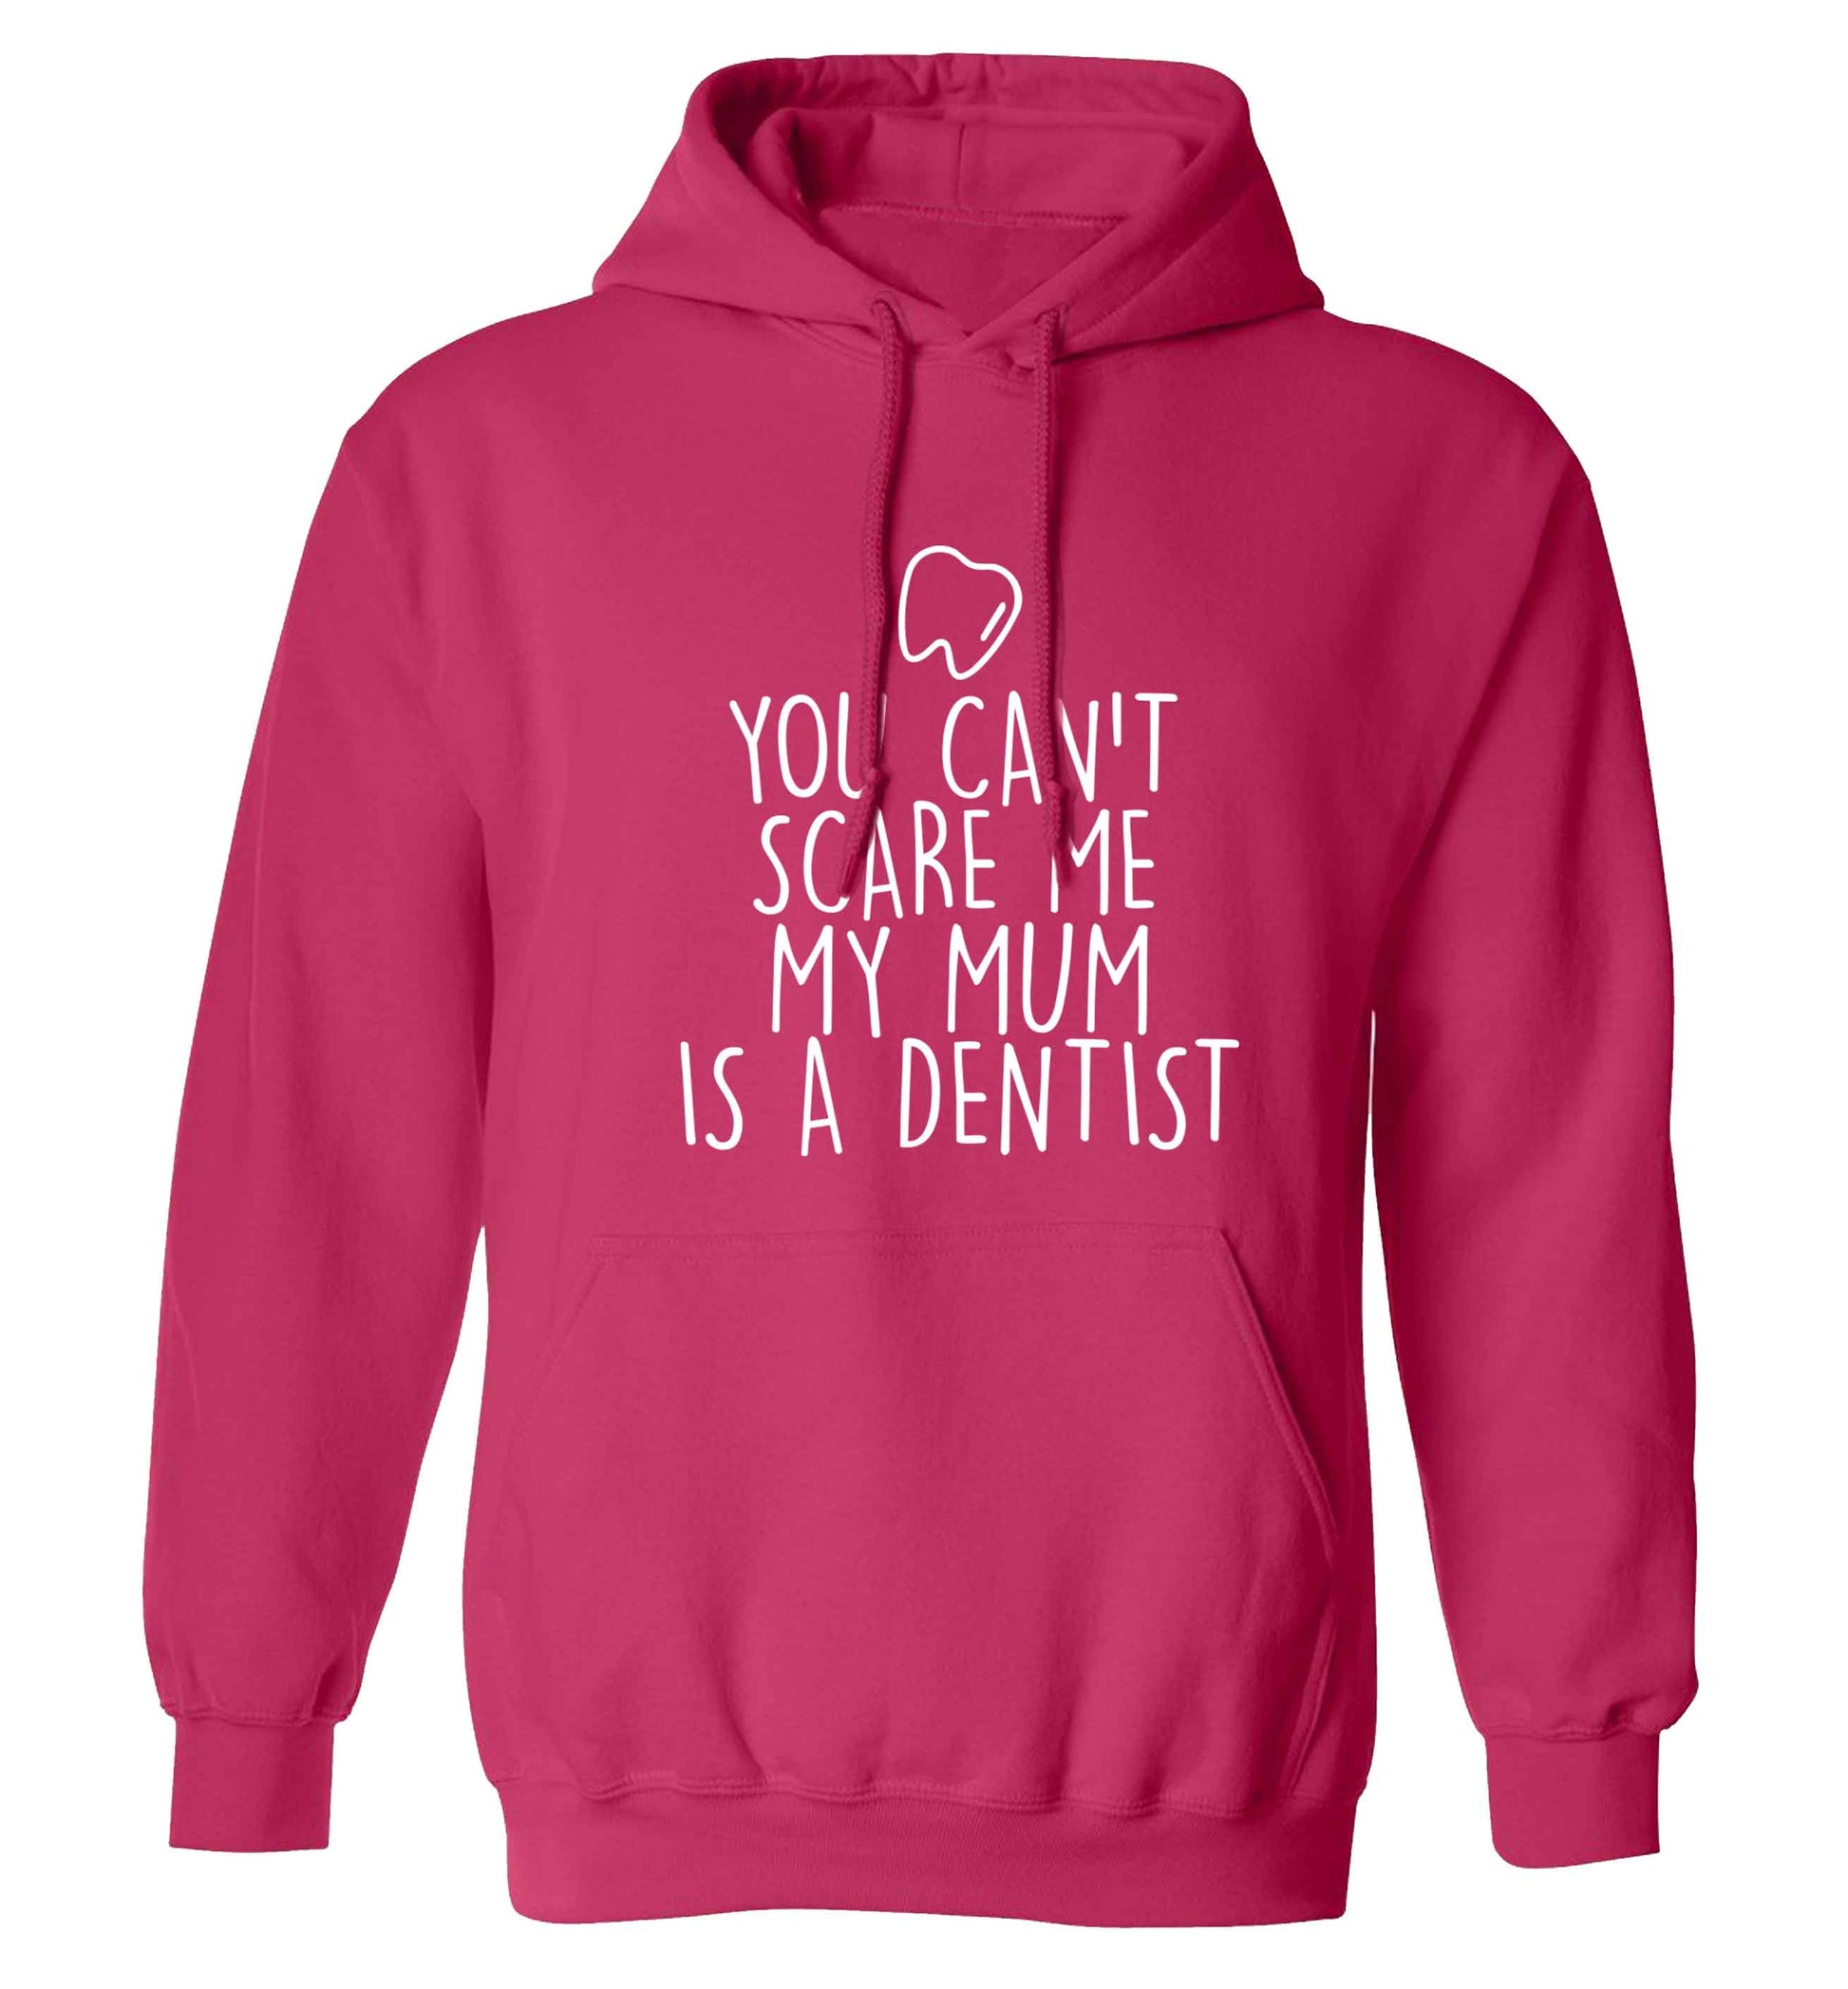 Minty Kisses Tooth Fairy (a) adults unisex pink hoodie 2XL